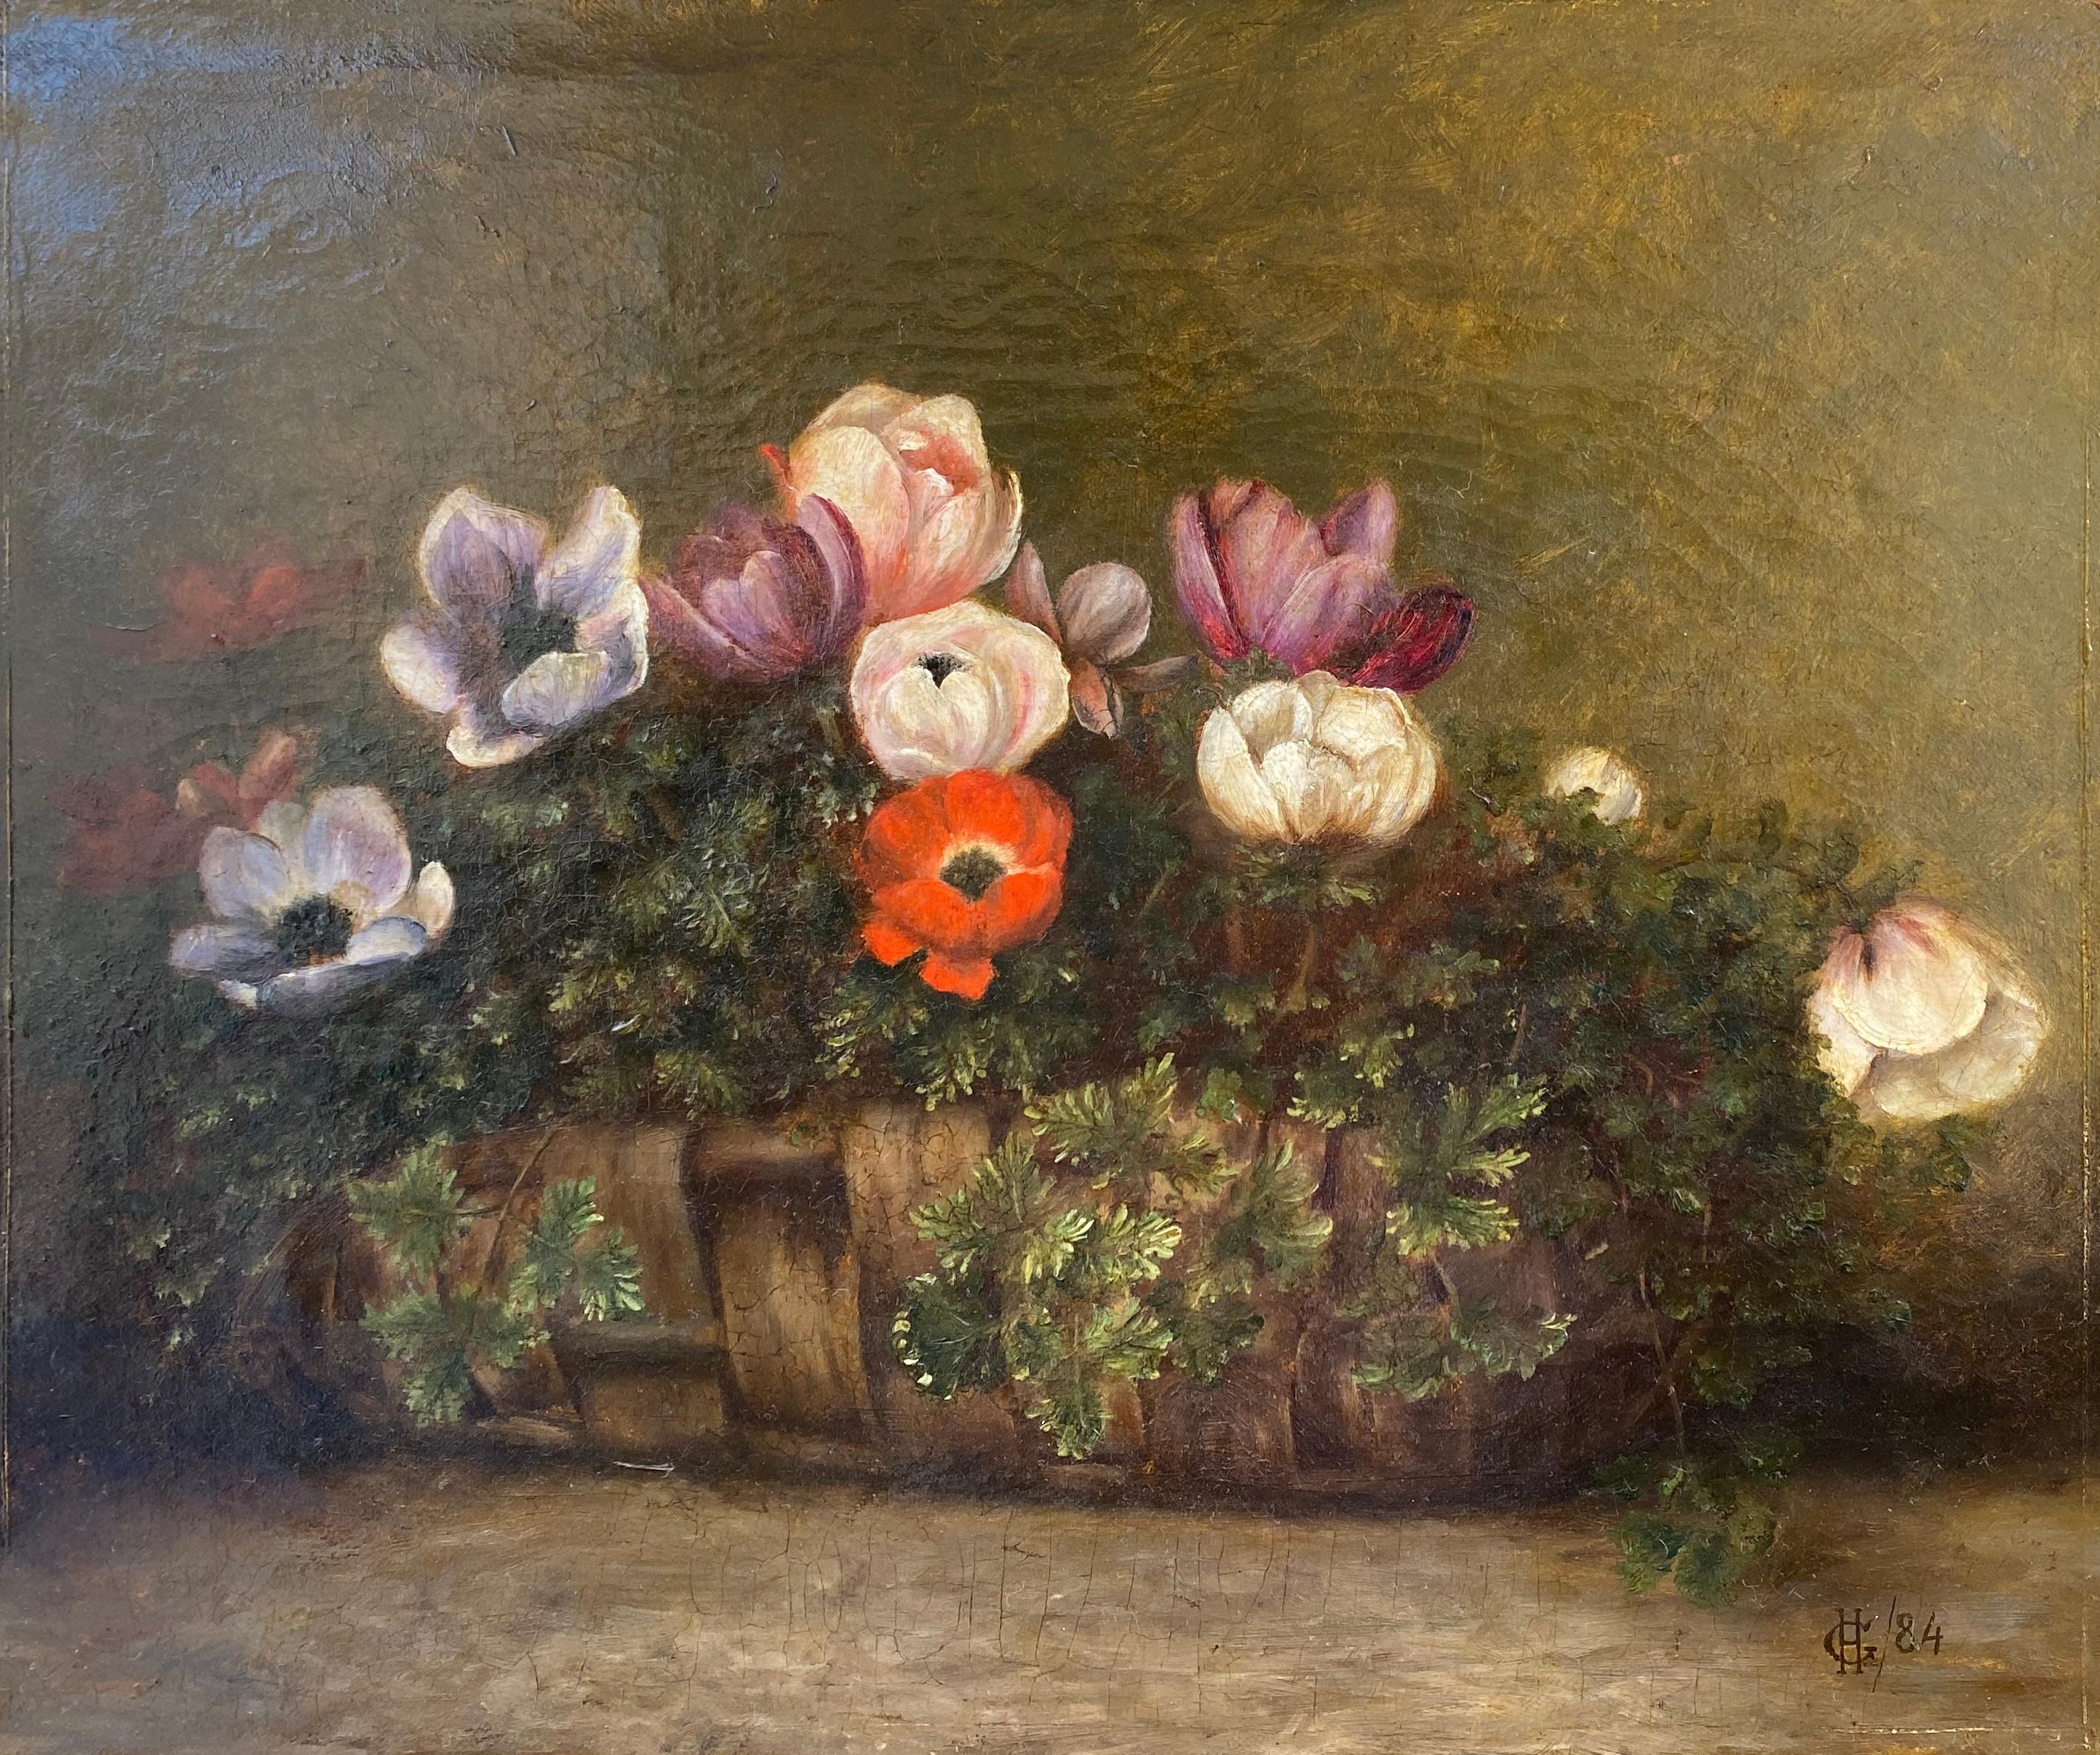 Wicket basket with Anemones a humble festive gift 19th century floral still life - Painting by Unknown